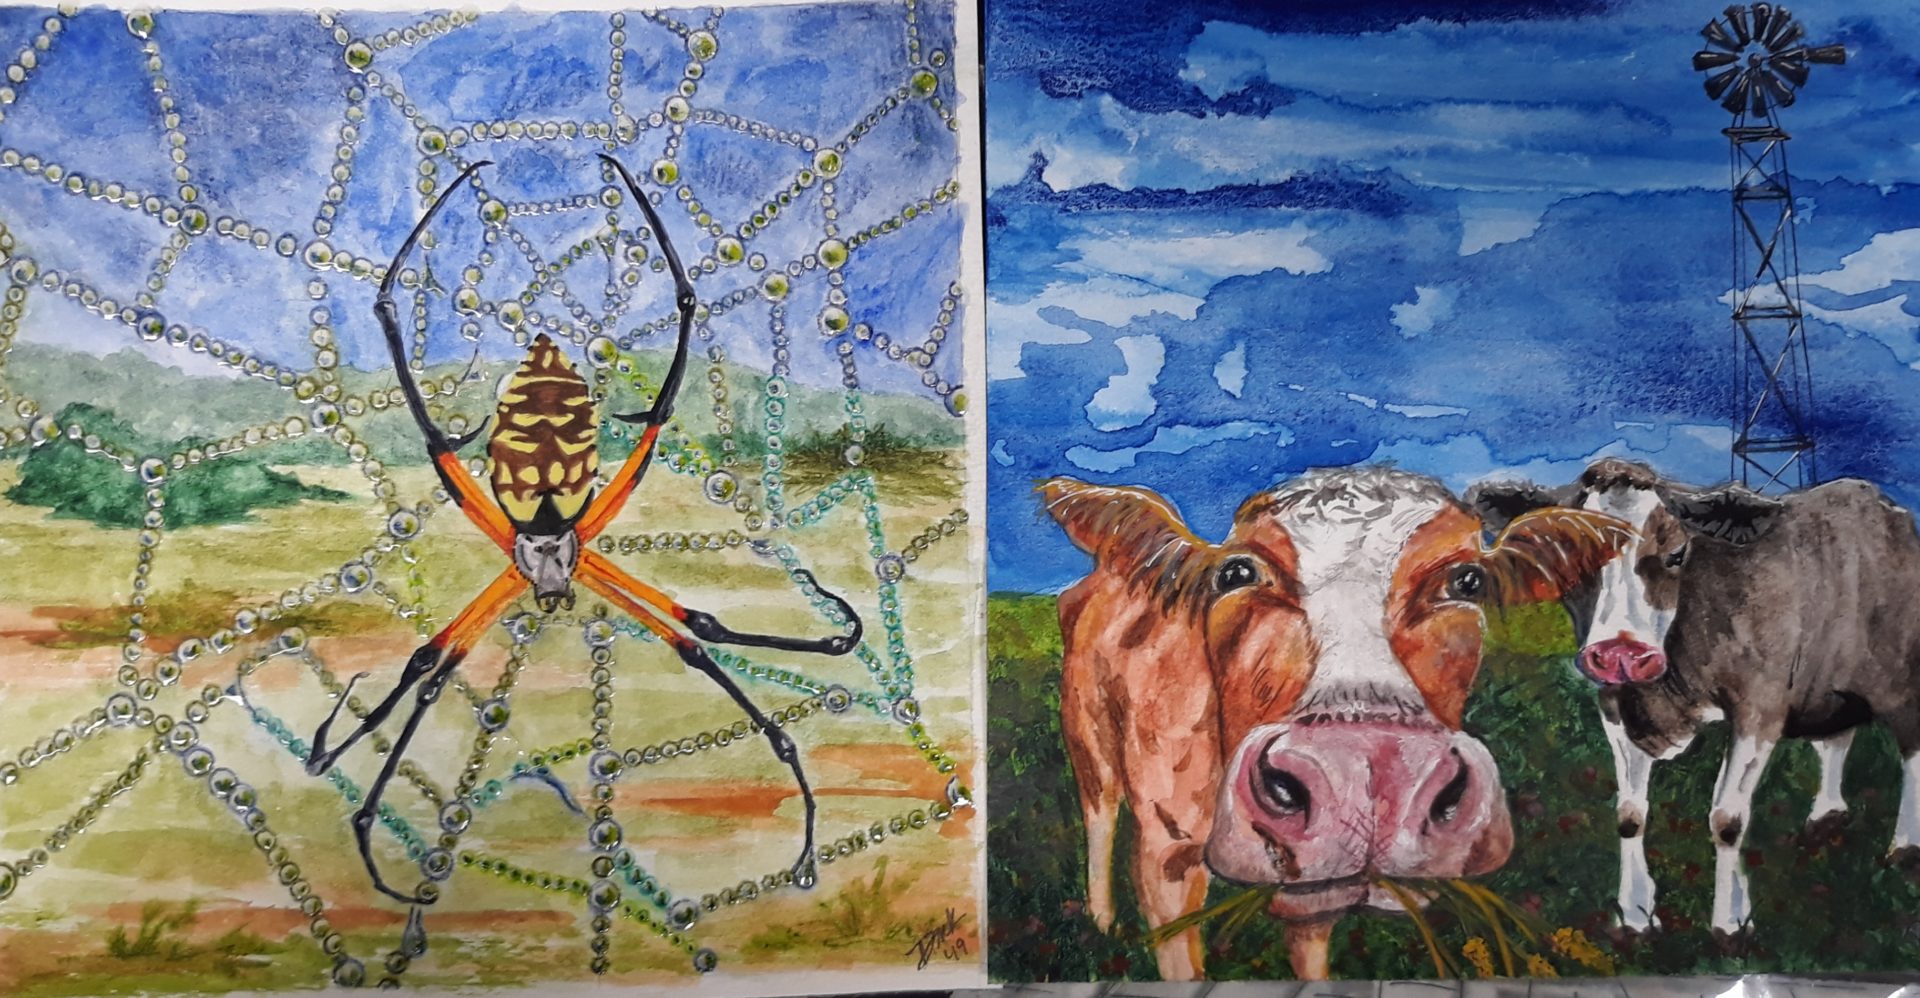 Watercolors, Golden Orb Weaver and Cow by Denise Knebel